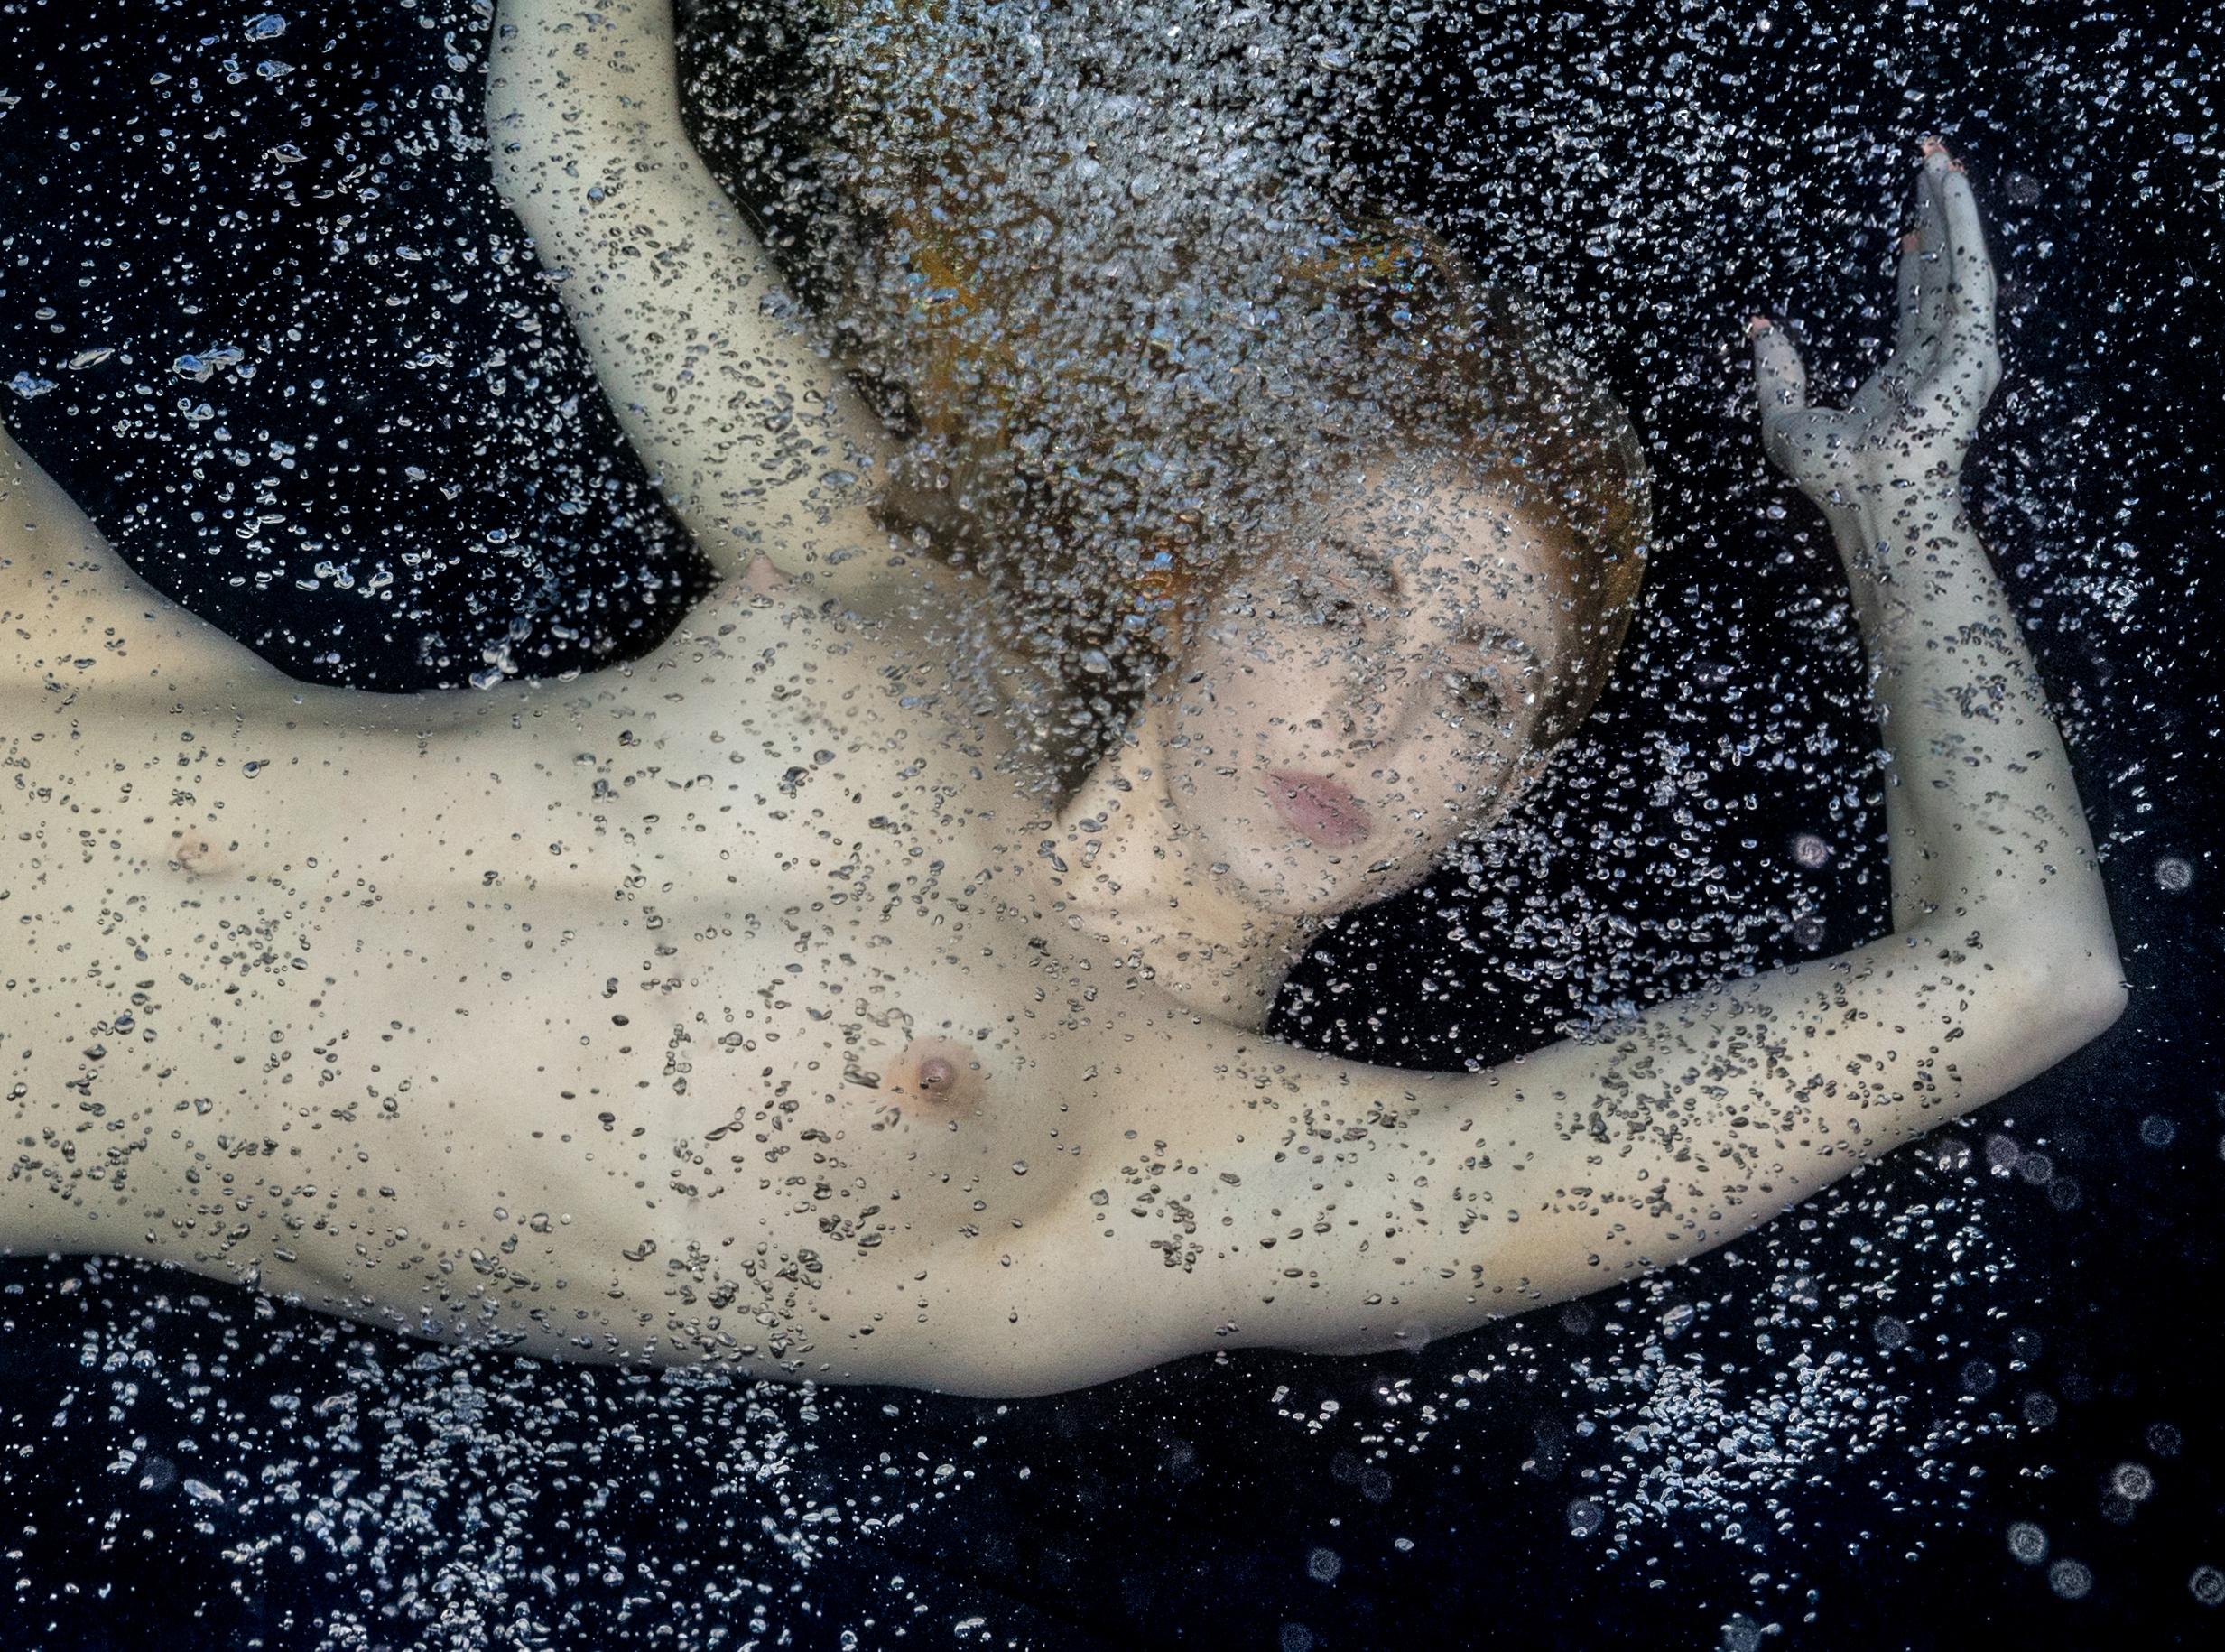 Underwater photograph of a young golden hair woman on a bottom of a pool.  Her beautiful naked body is wrapped in clouds of air bubbles. 

Original gallery quality archival pigment print.  
Limited edition of 24 print #3
Image size: 23.2